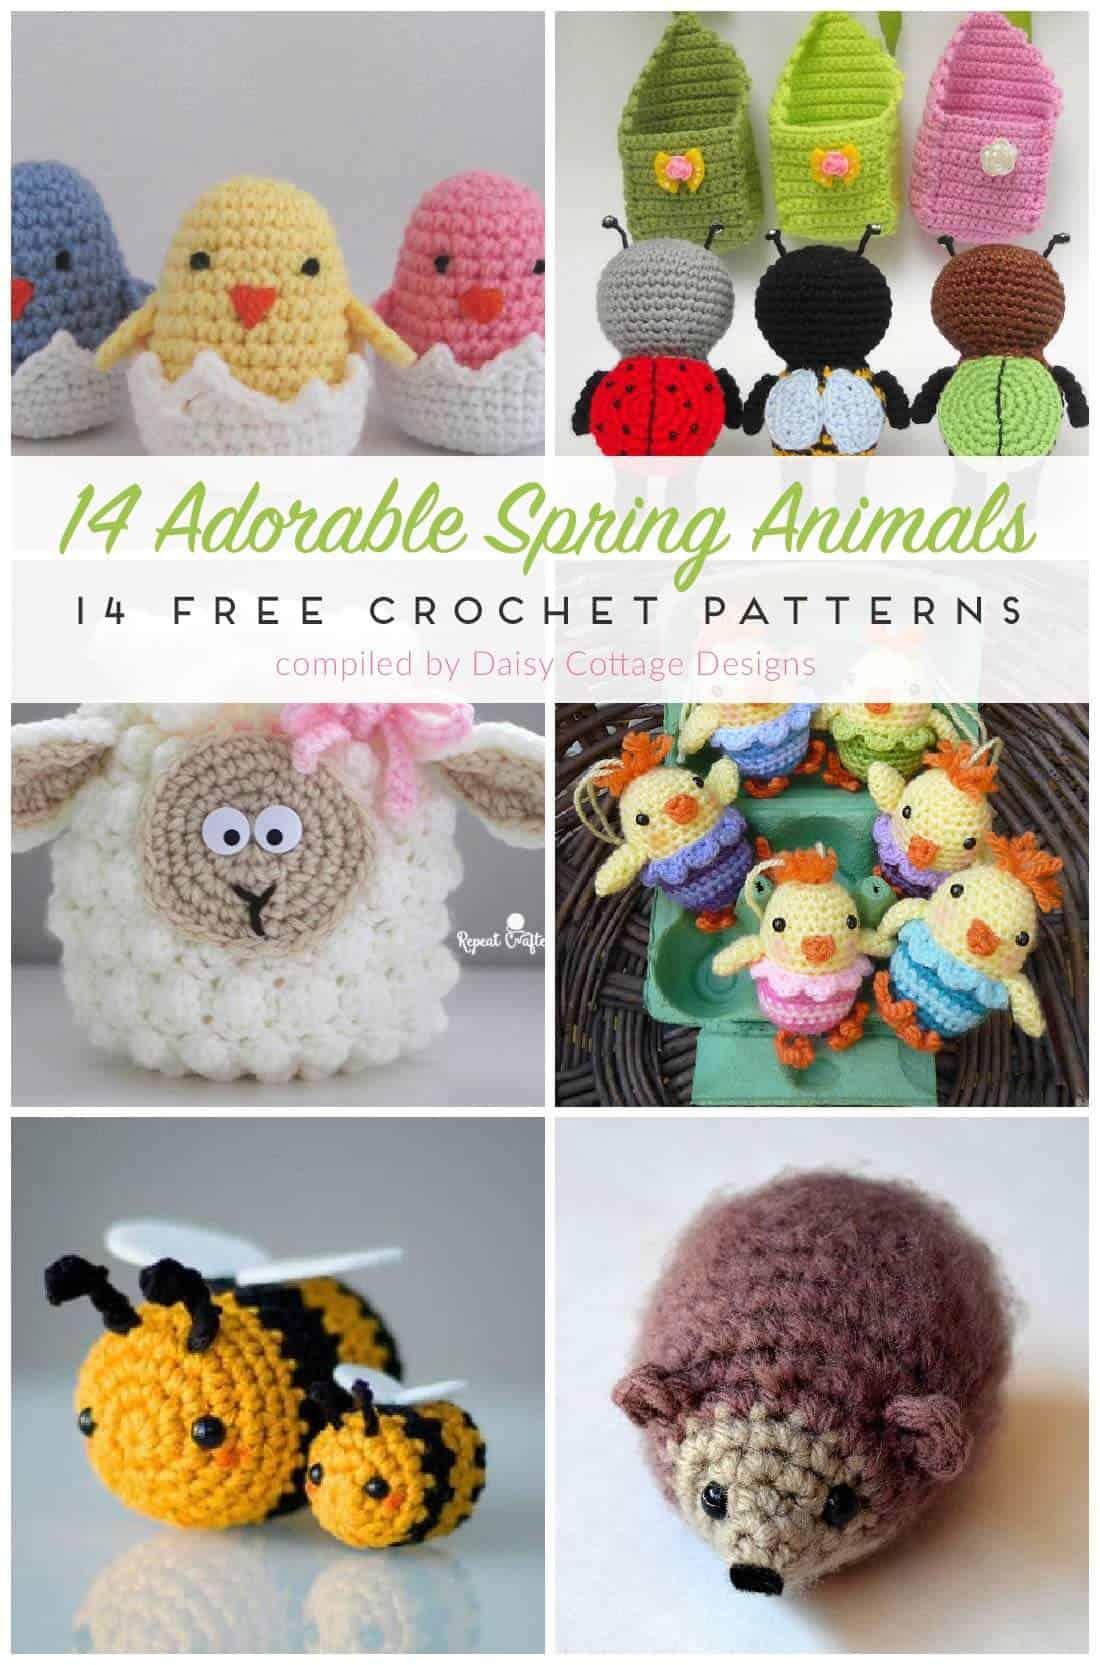 free crochet patterns | crochet patterns for spring | stuffed animal crochet patterns | These adorable crochet patterns are just the thing for Spring. From stuffing Easter baskets to making your home look ready for spring, there's something here that will be perfect for you this season!